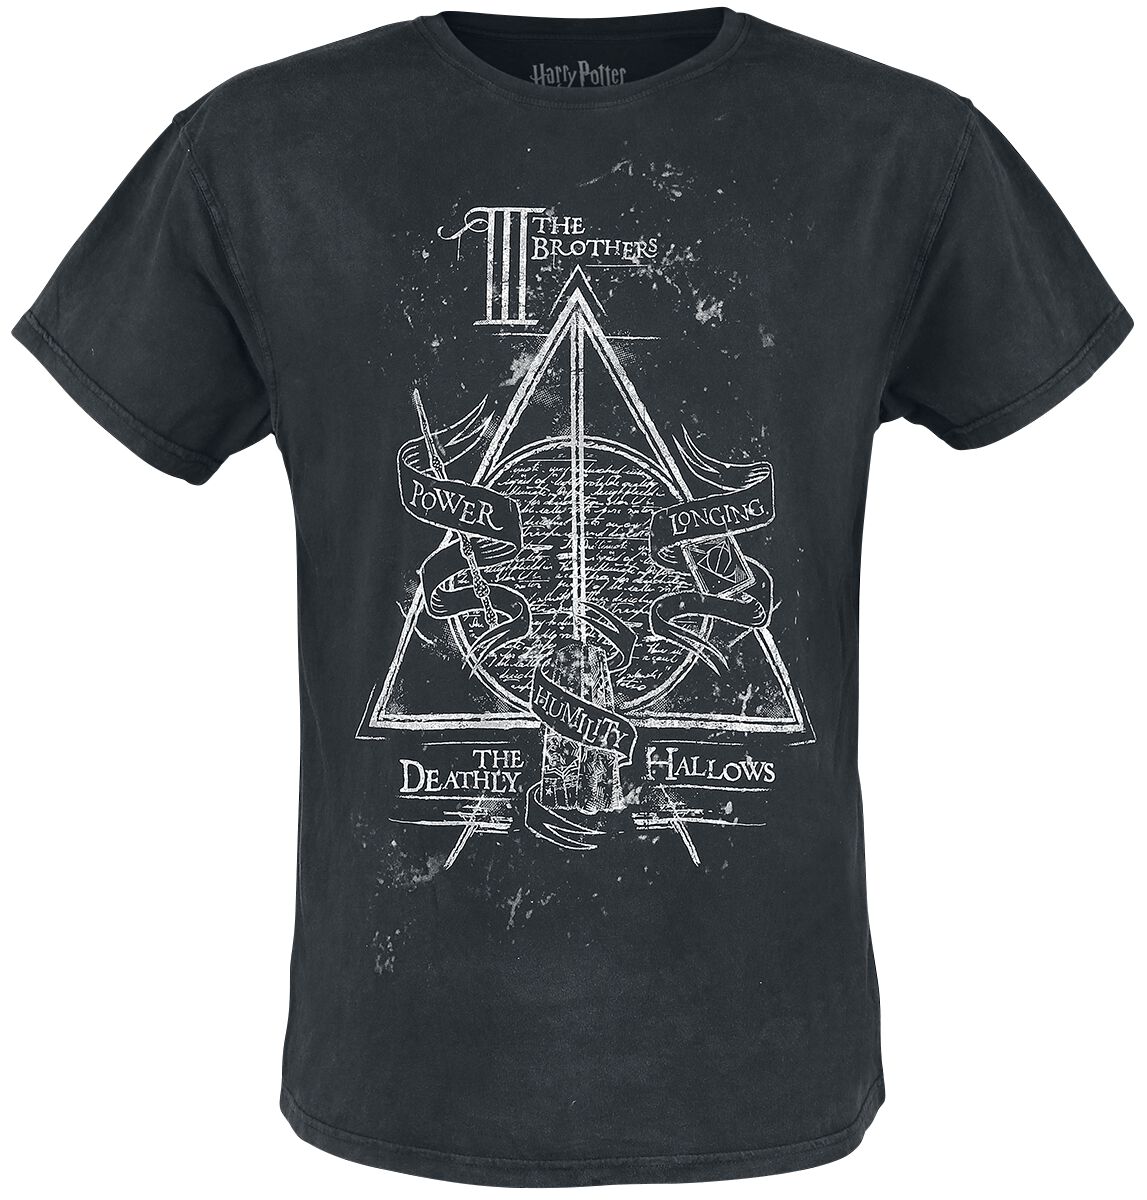 Harry Potter The Deathly Hallows T-Shirt schwarz in L